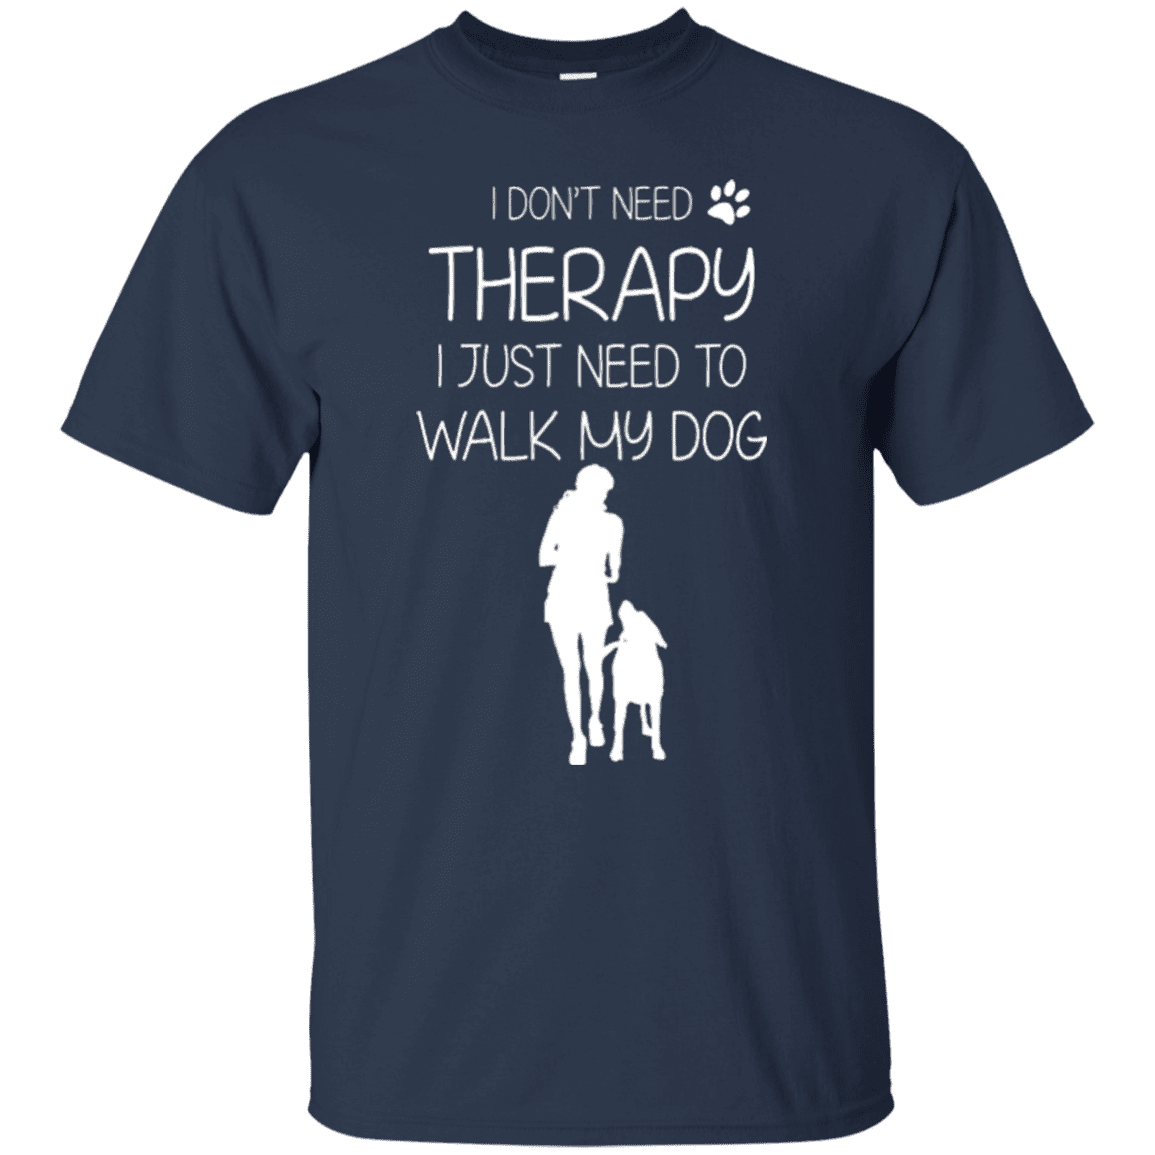 I Don't Need Therapy - T Shirt.